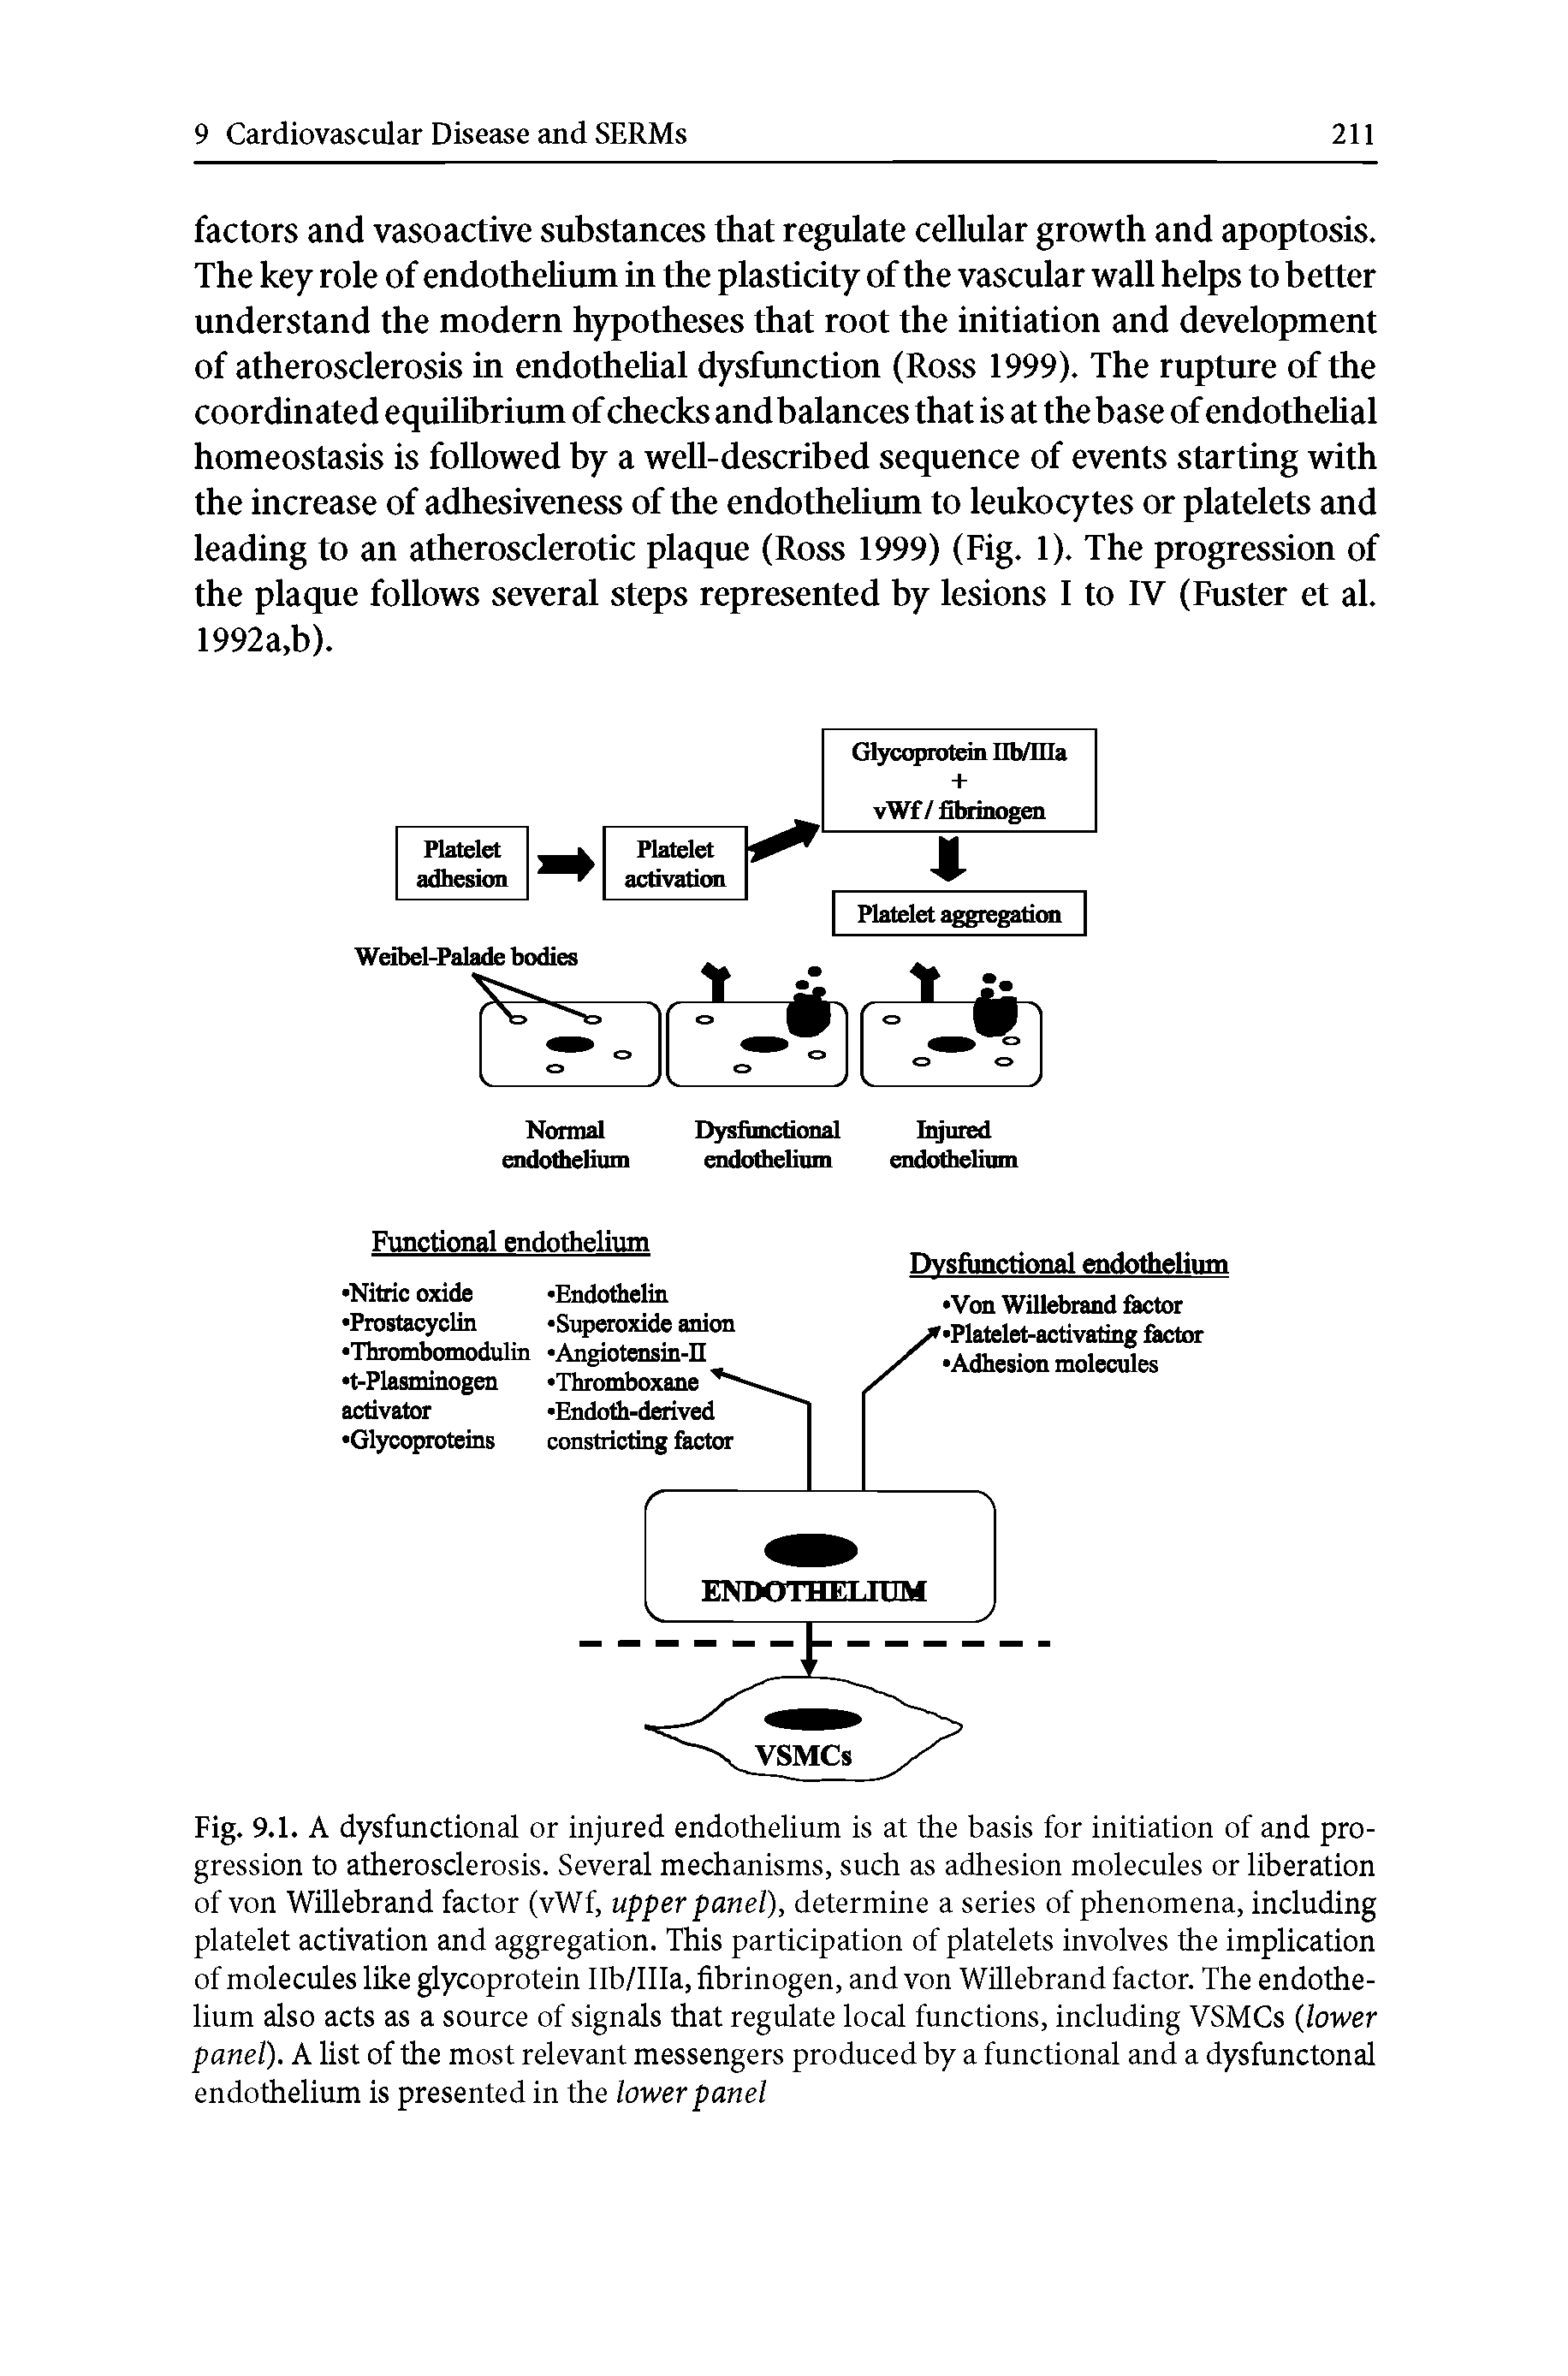 Fig. 9.1. A dysfunctional or injured endothelium is at the basis for initiation of and progression to atherosclerosis. Several mechanisms, such as adhesion molecules or liberation of von Willebrand factor (vWf, upper panel), determine a series of phenomena, including platelet activation and aggregation. This participation of platelets involves the implication of molecules like glycoprotein Ilb/IIIa, fibrinogen, and von Willebrand factor. The endothelium also acts as a source of signals that regulate local functions, including VSMCs (lower panel). A list of the most relevant messengers produced by a functional and a dysfunctonal endothelium is presented in the lower panel...